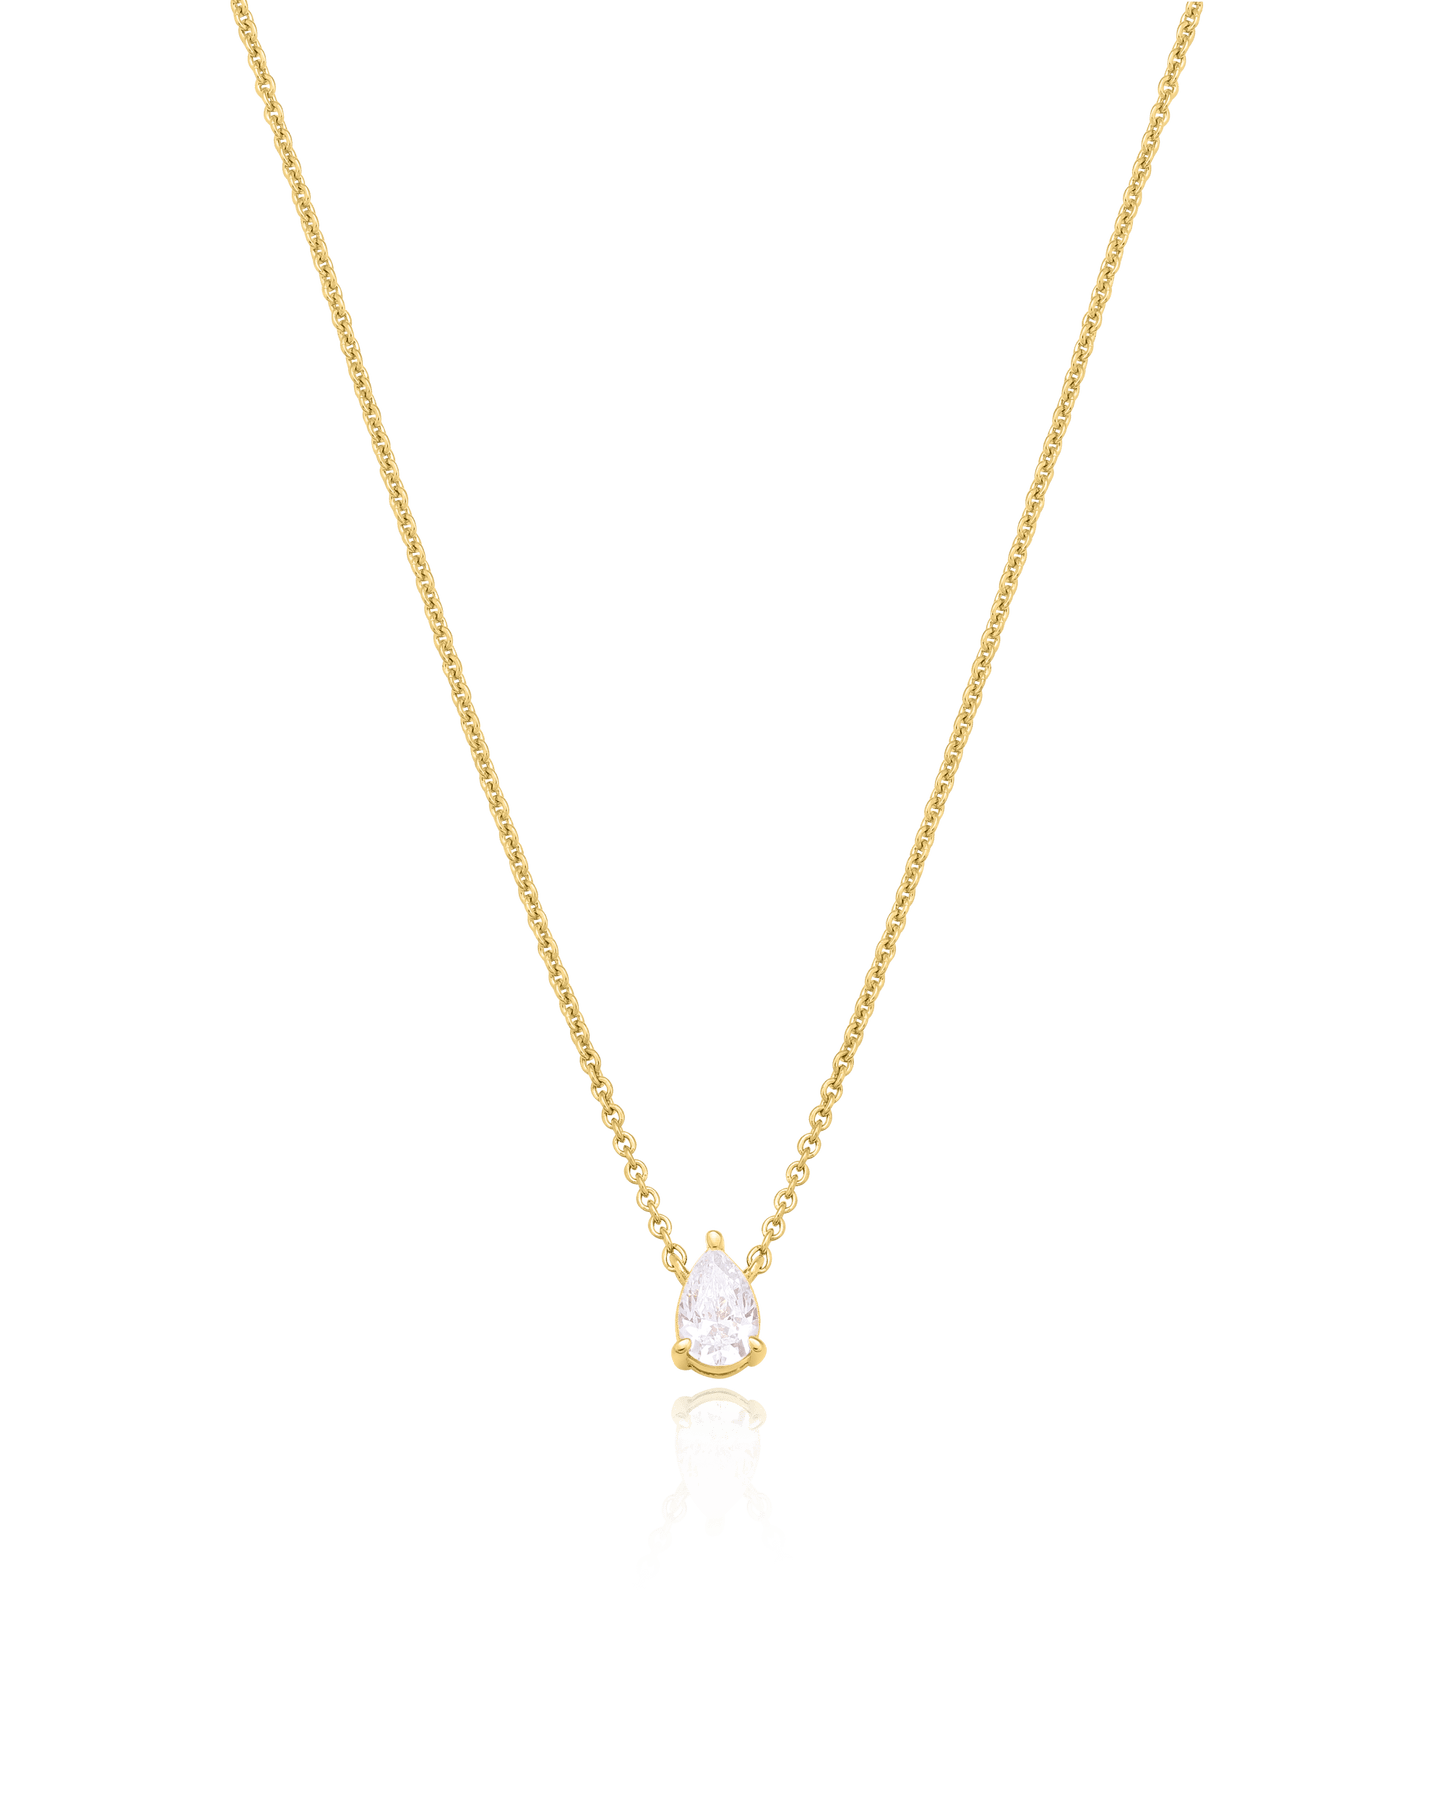 Pear Solitaire Diamond Necklace - 14K Rose Gold Necklaces magal-dev 